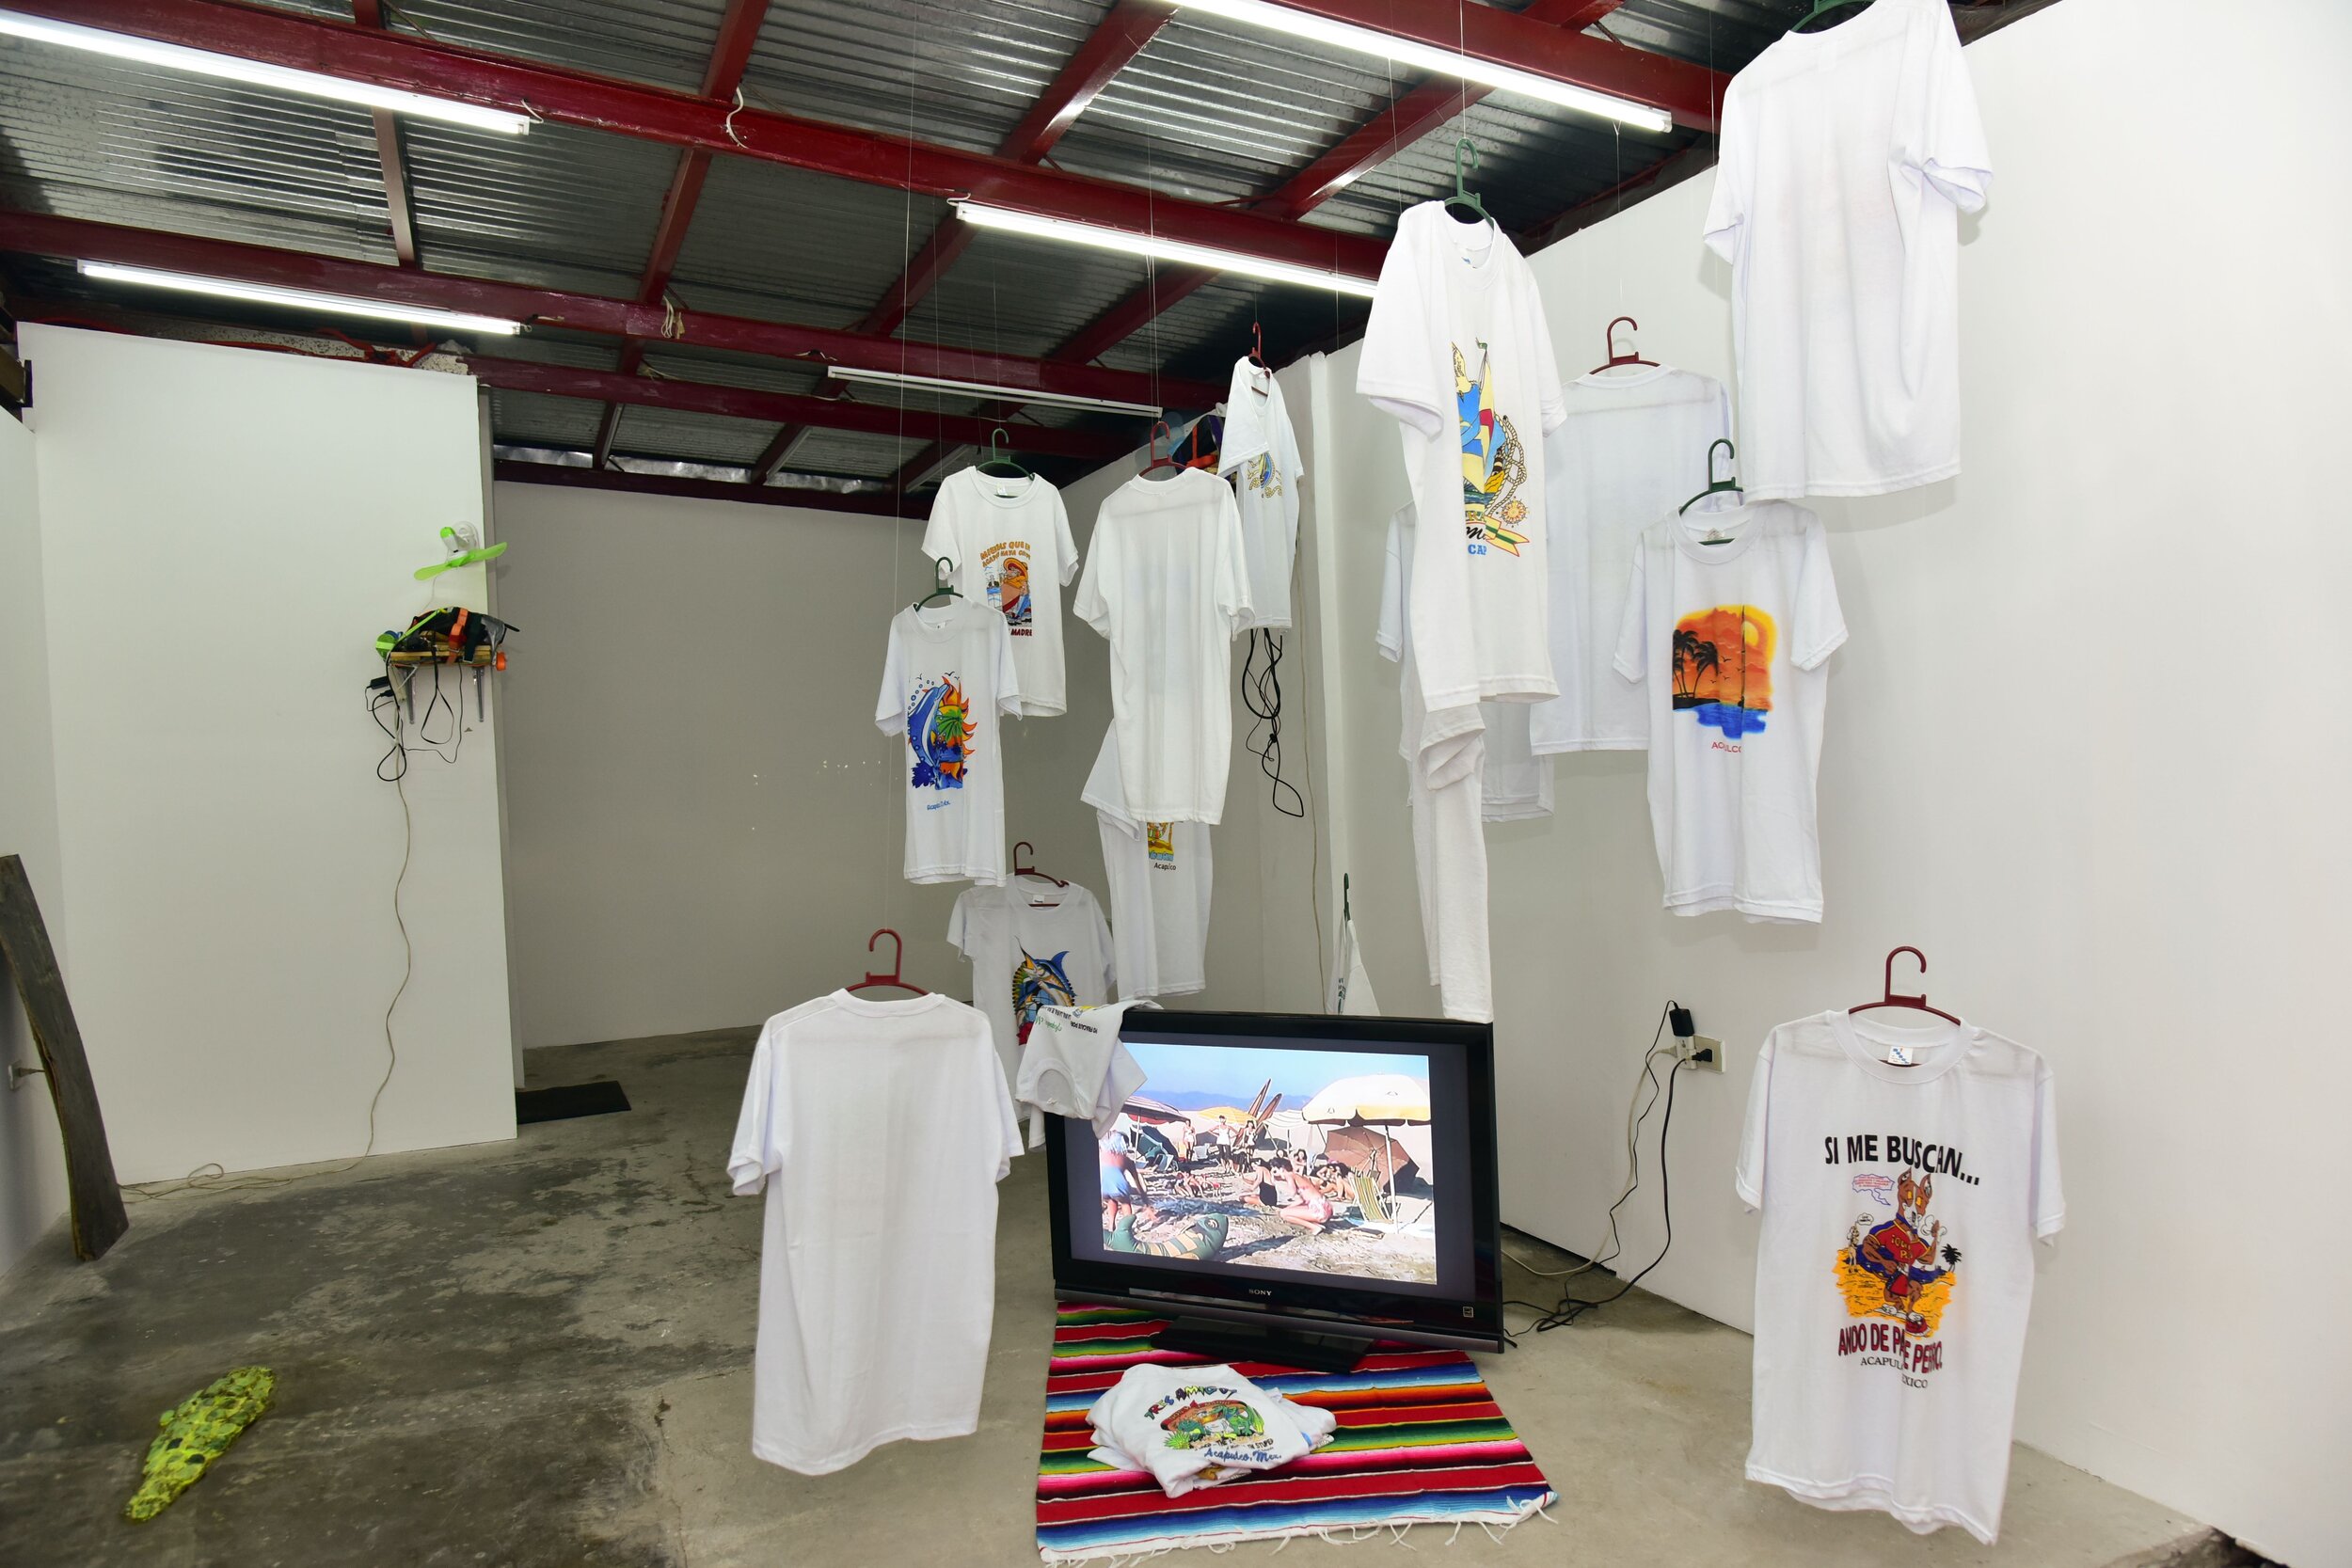 Cristóbal Gracia, "Nos Value Madres", 2019, mixed media, touristic t-shirts from Acapulco, sarape blanket; "Tres Amigos, the good, the bad and the stuped" video loop (3:35 mins) 